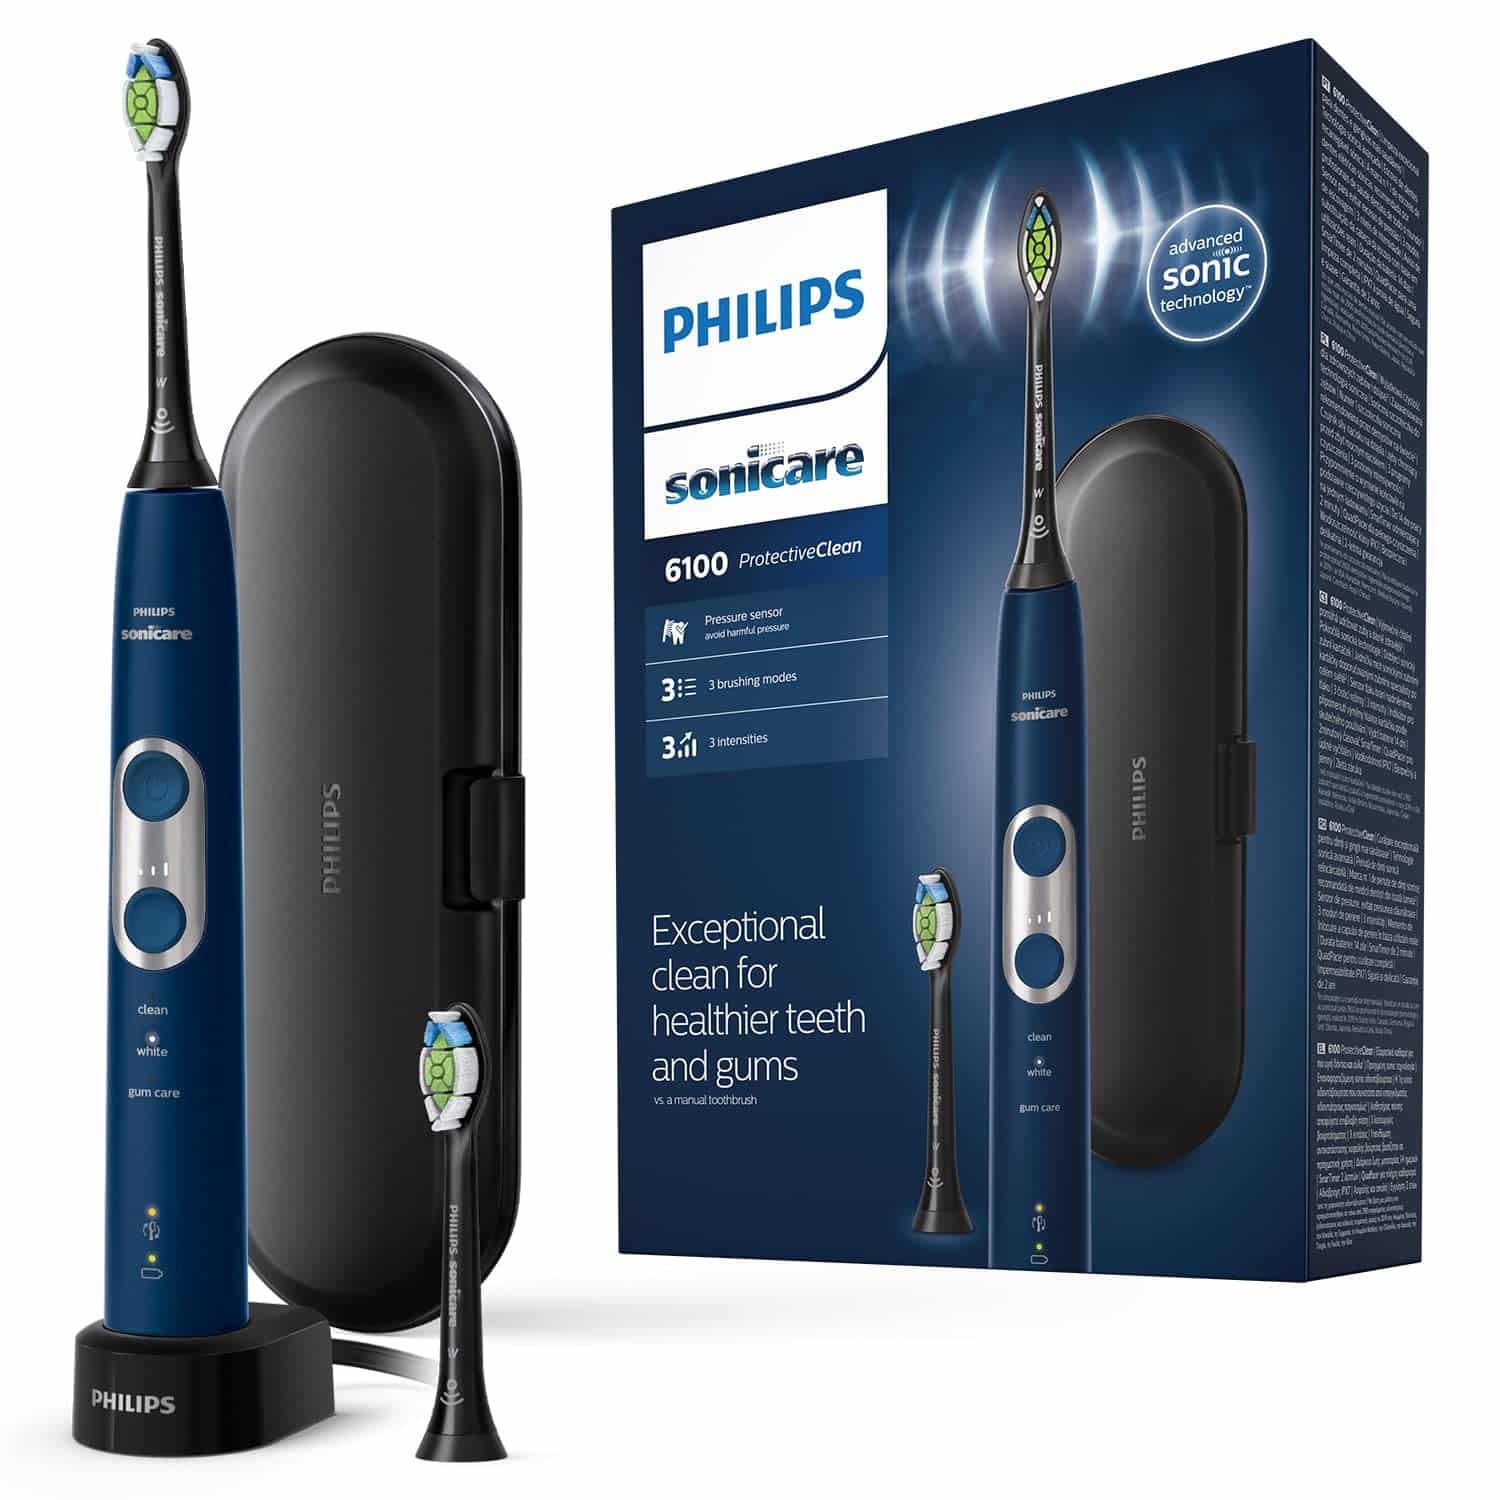 Philips Sonicare ProtectiveClean 6100 avis 